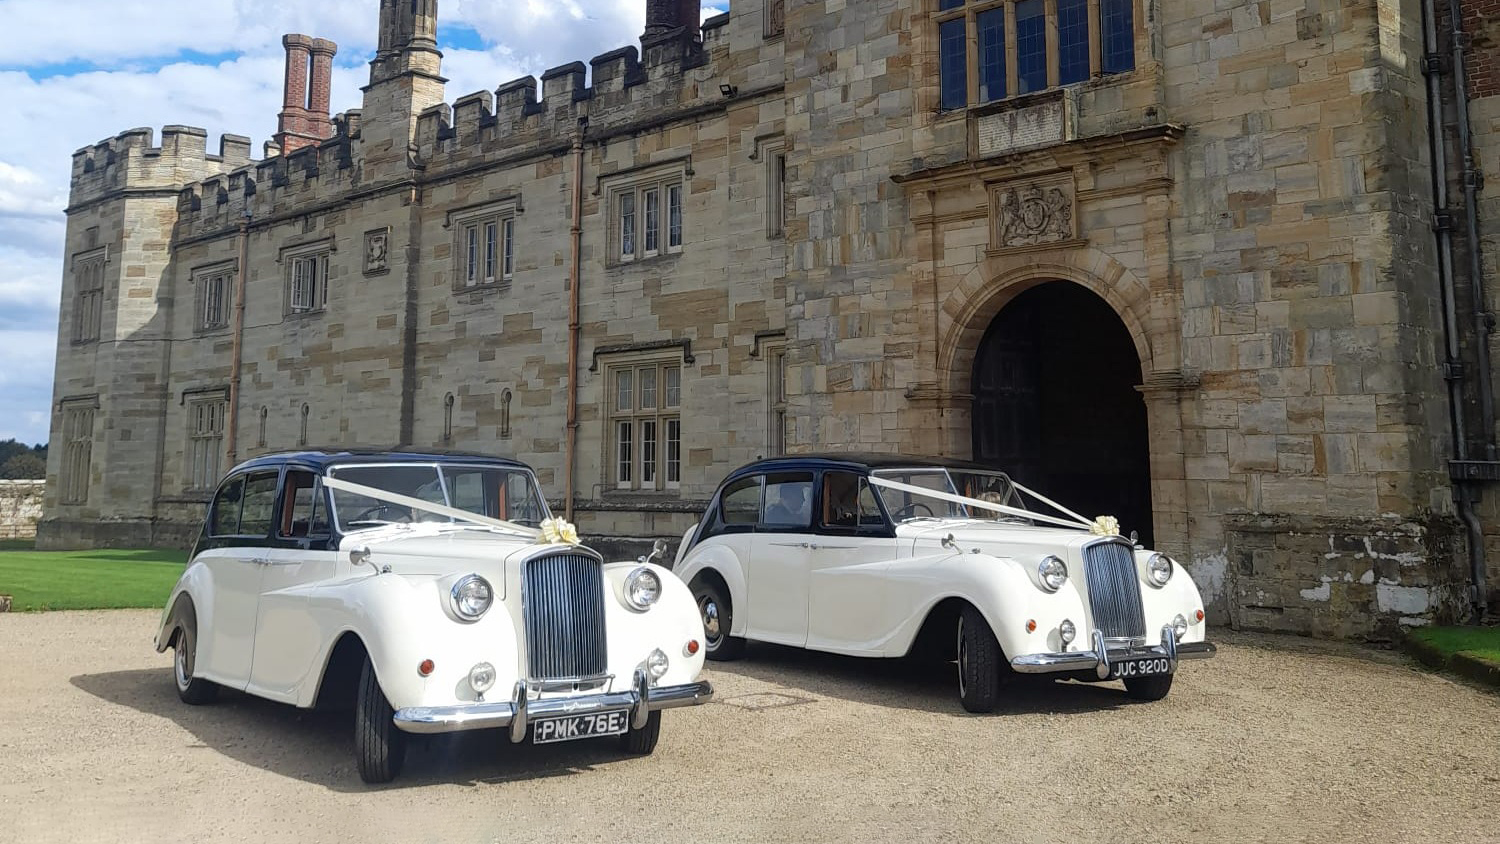 Two Classic Austin Princess Limousine decorated with Ivory Ribbons and Bows on top of the front grill. Vehicles are parked in front of a large manor house in Gillingham